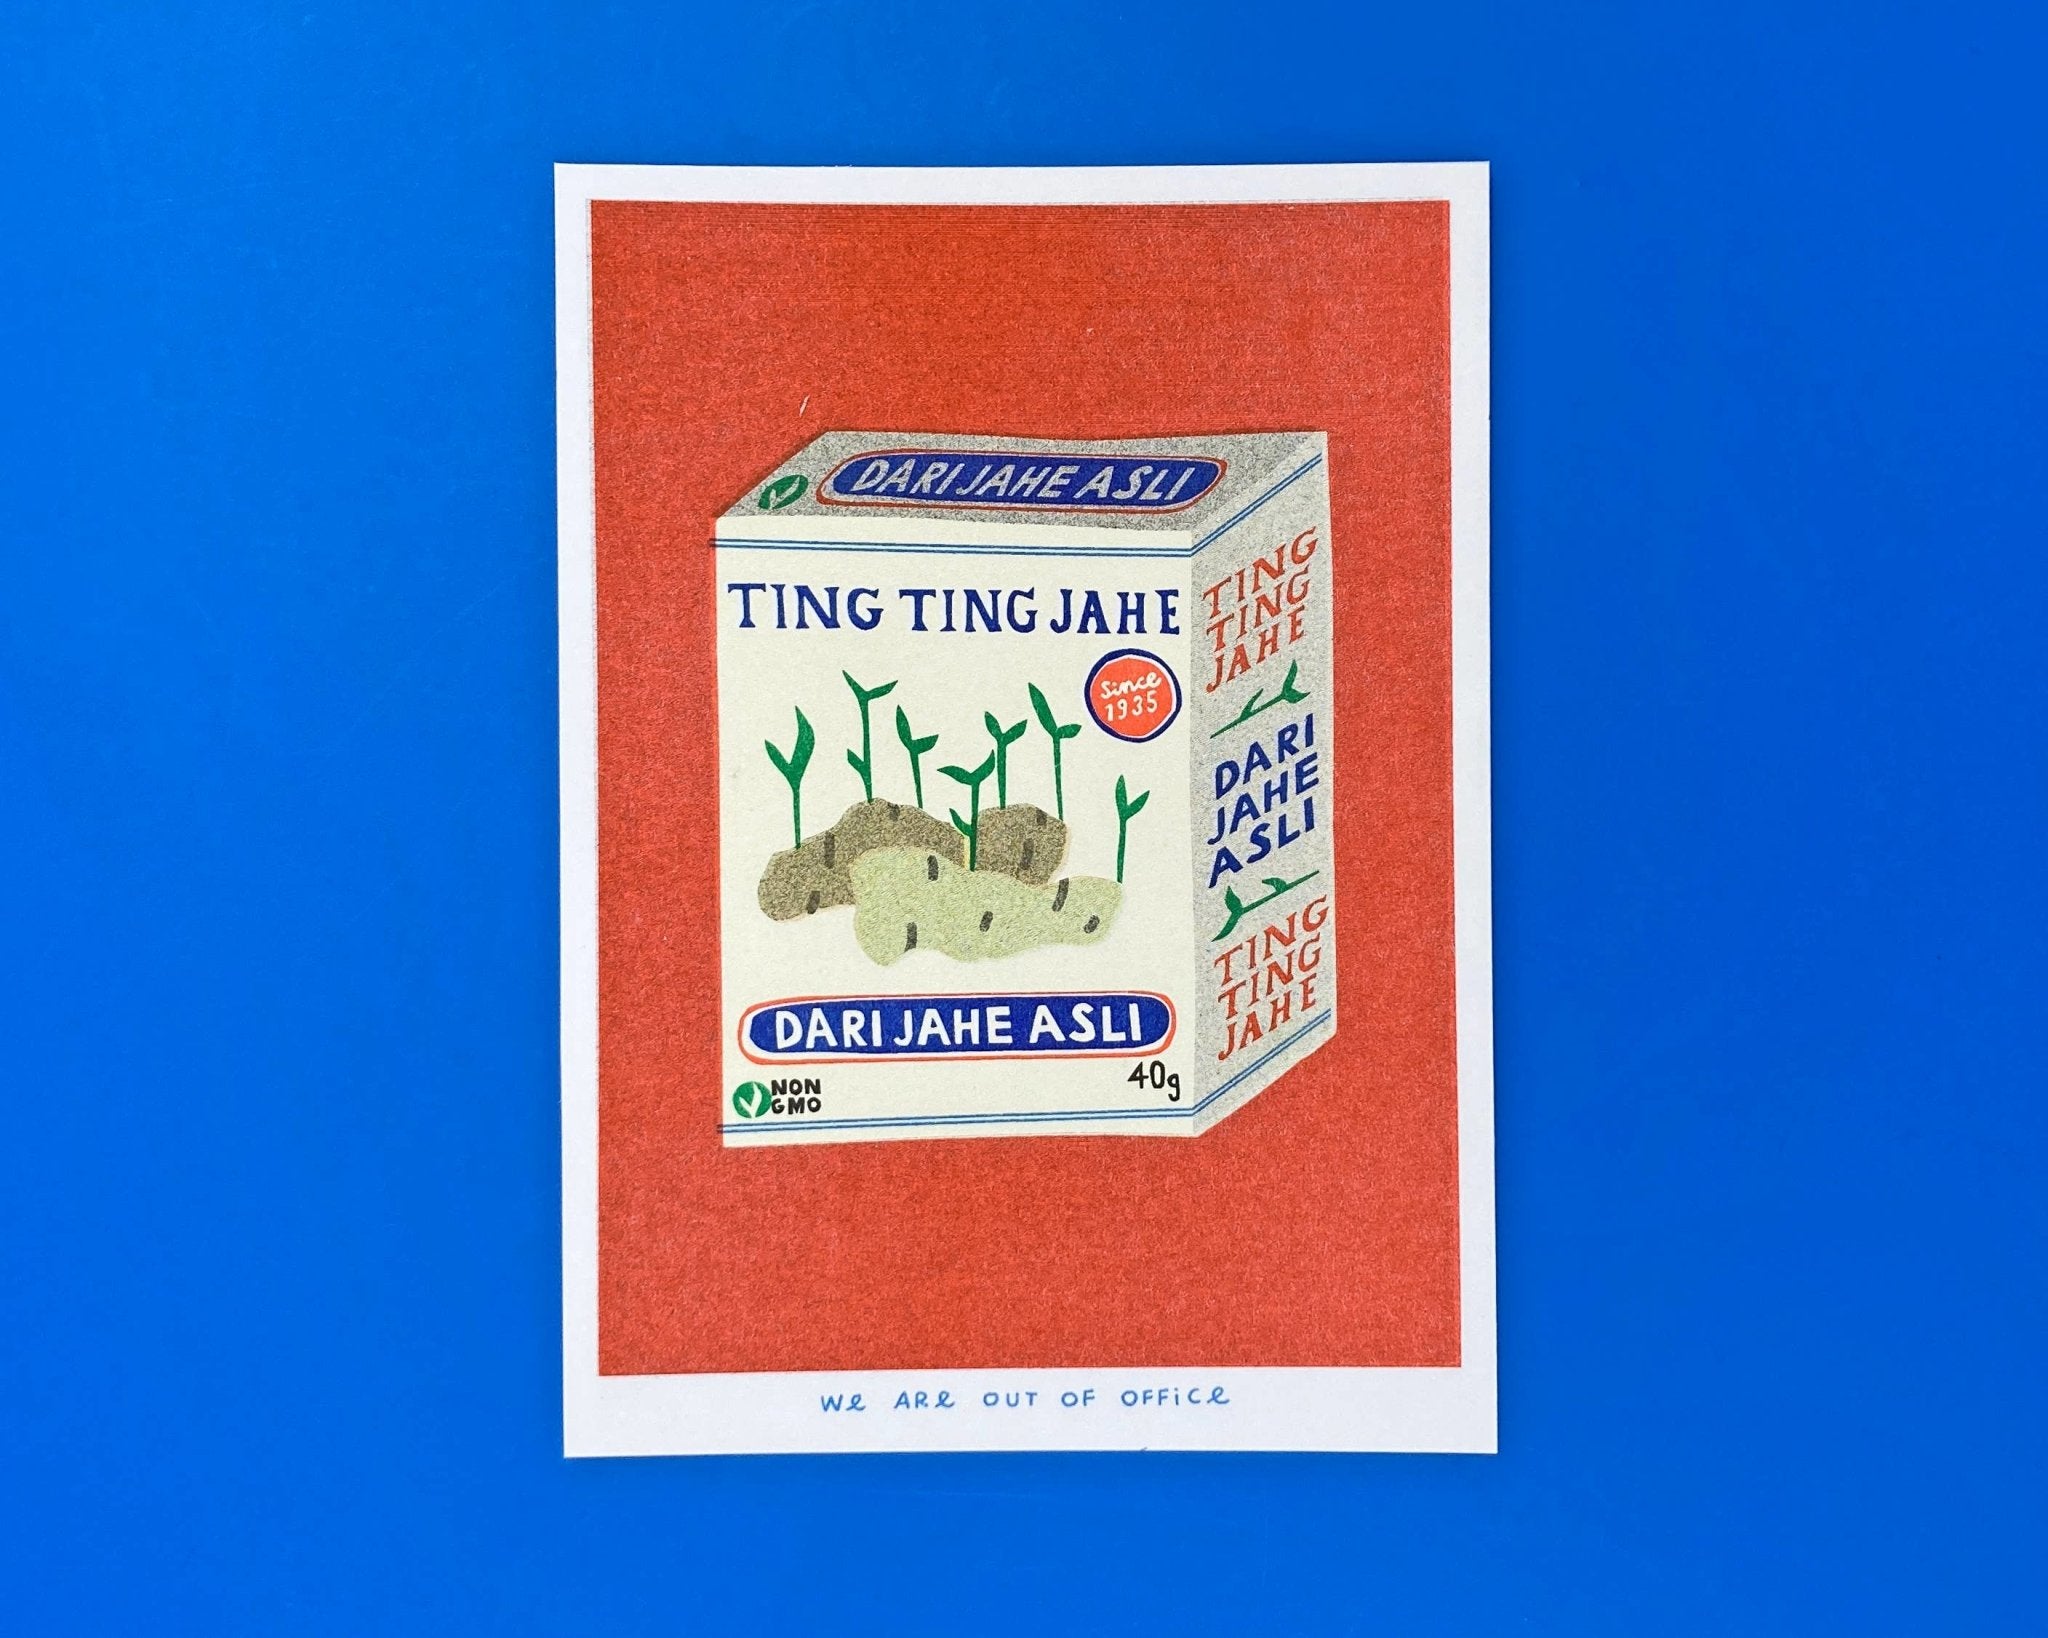 We are out of office - A risograph print of a box of ting ting candy - Ensemble Studios